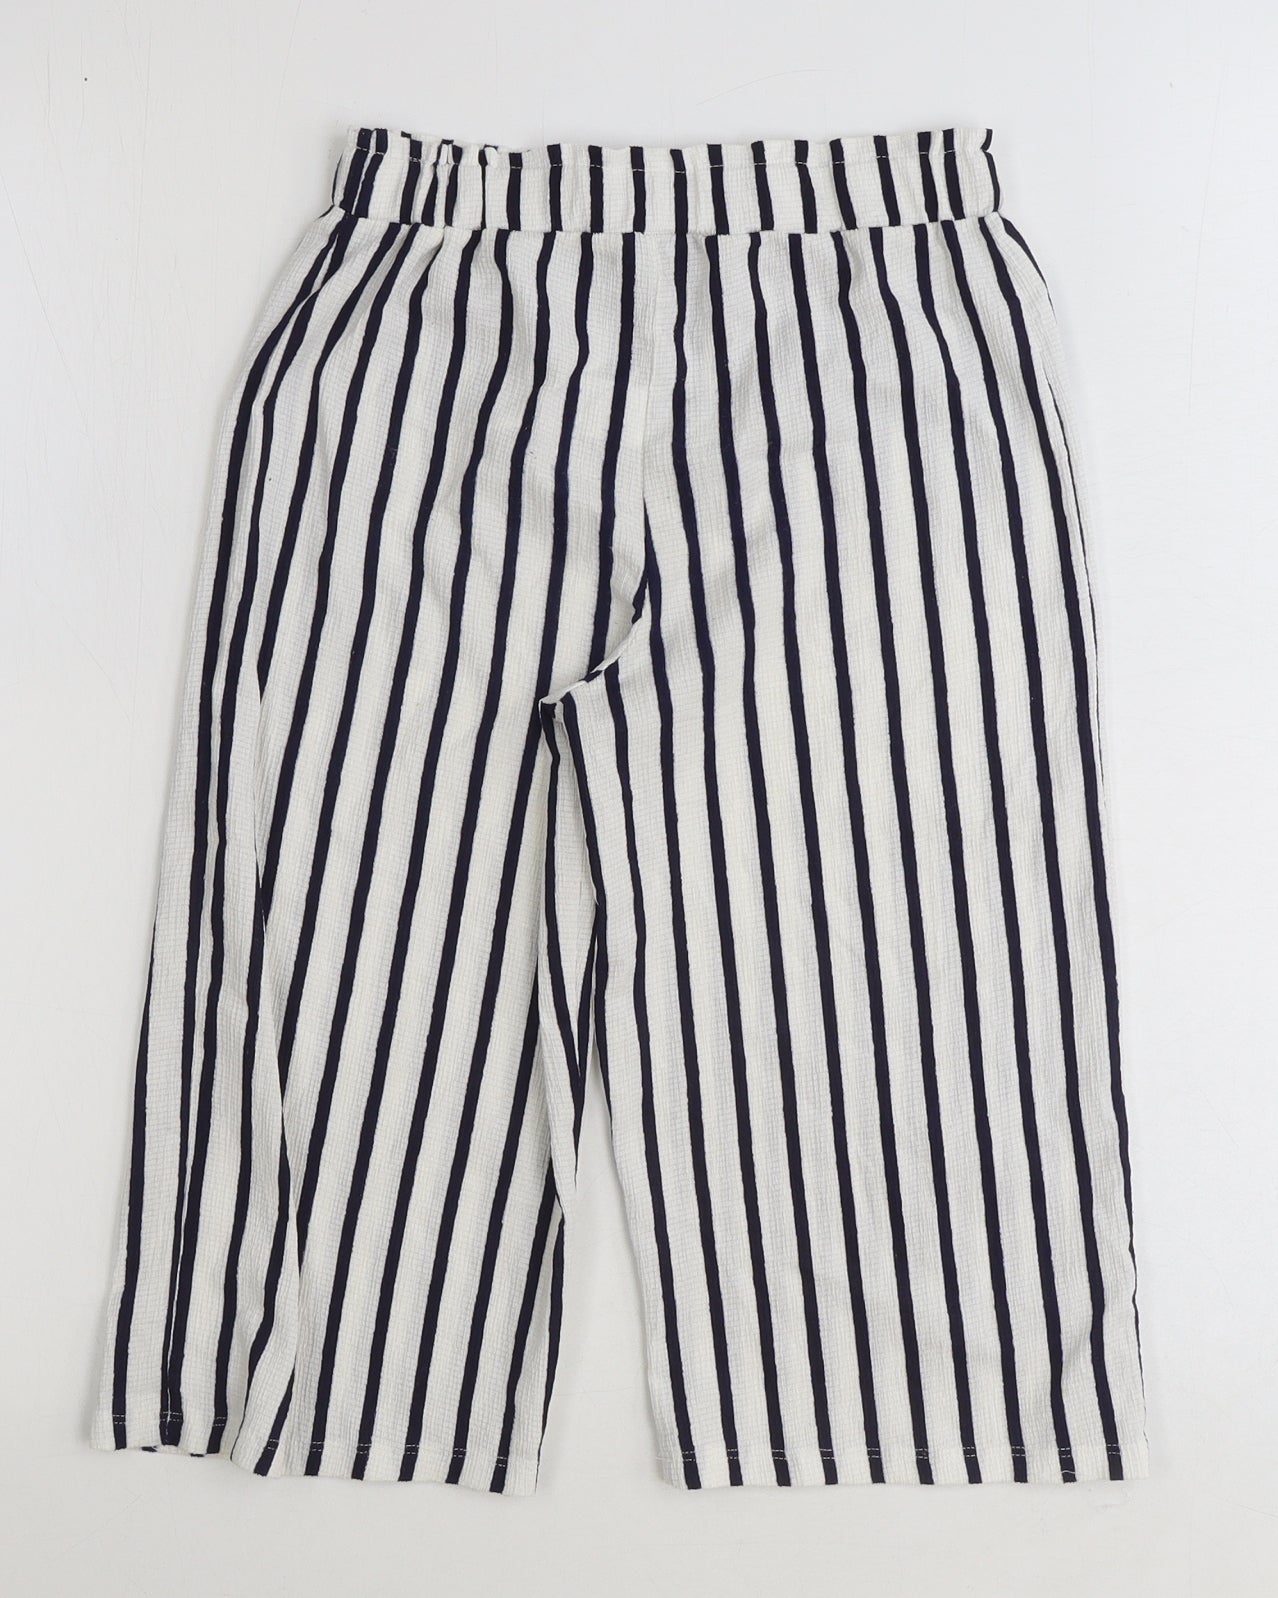 Primark Girls White Striped Polyester Jogger Trousers Size 7-8 Years Regular Pullover